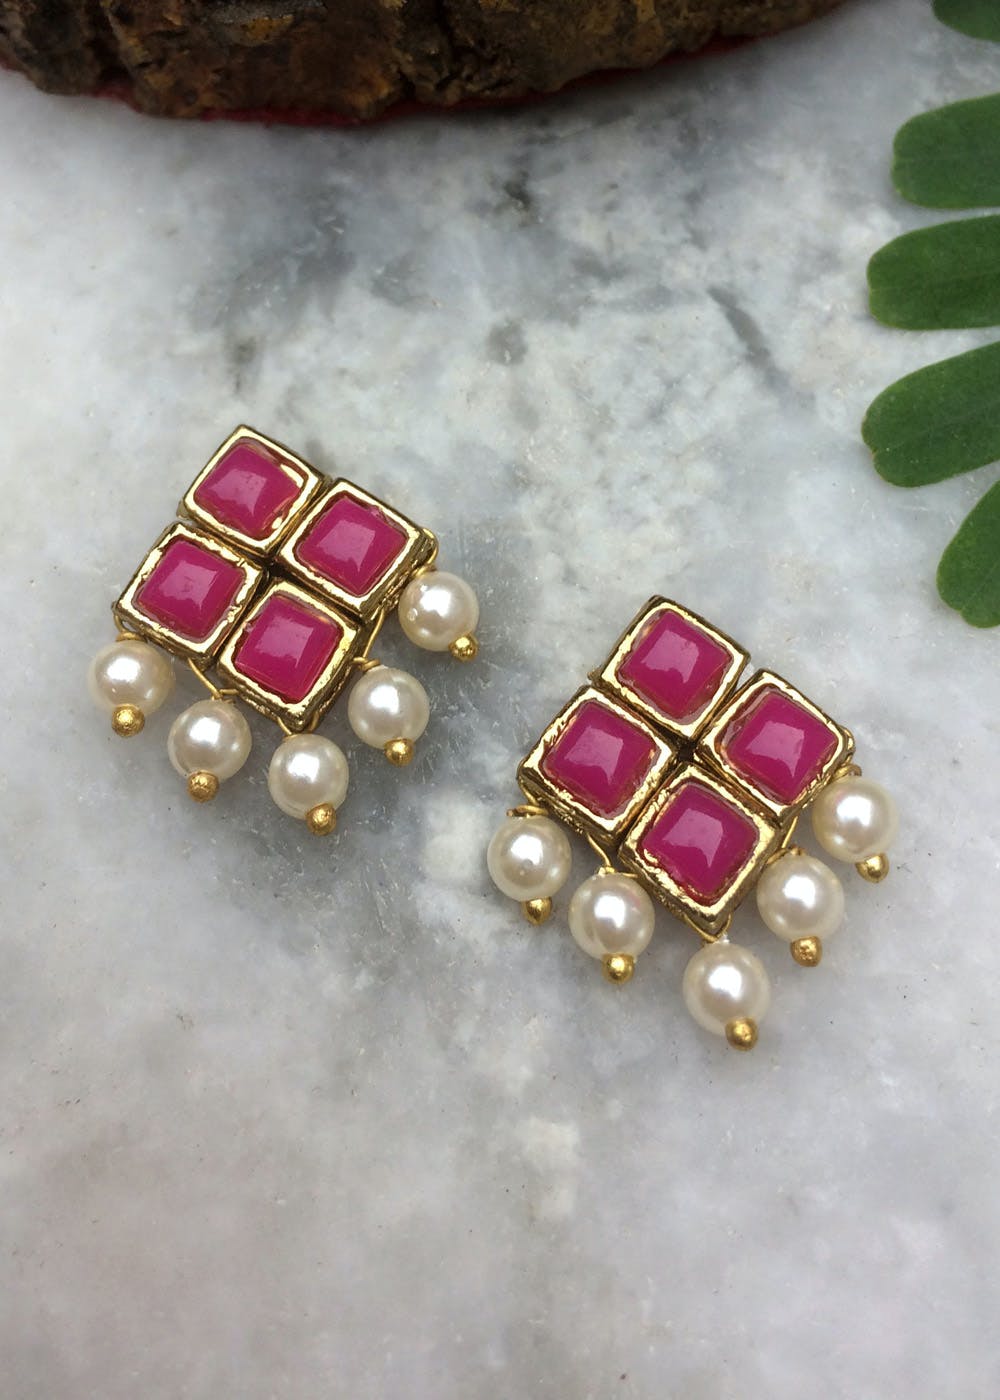 Buy Glimpsy Drop and danglers bollywood style rectangular shape shopire stone  earrings for party and weddings (Dark pink) at Amazon.in